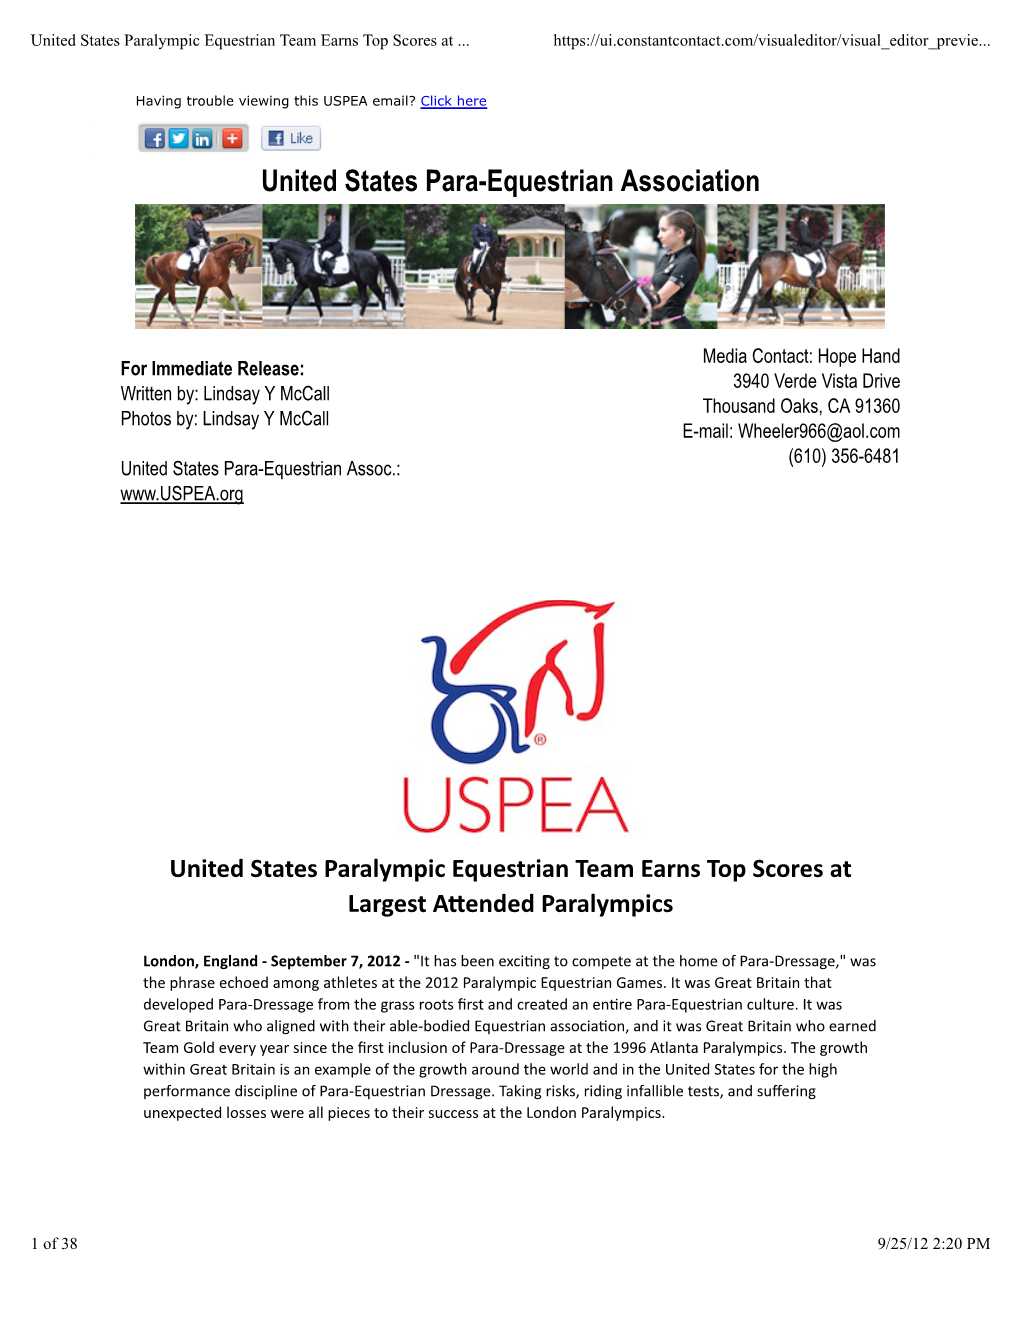 United States Paralympic Equestrian Team Earns Top Scores at Largest A�Ended Paralympics